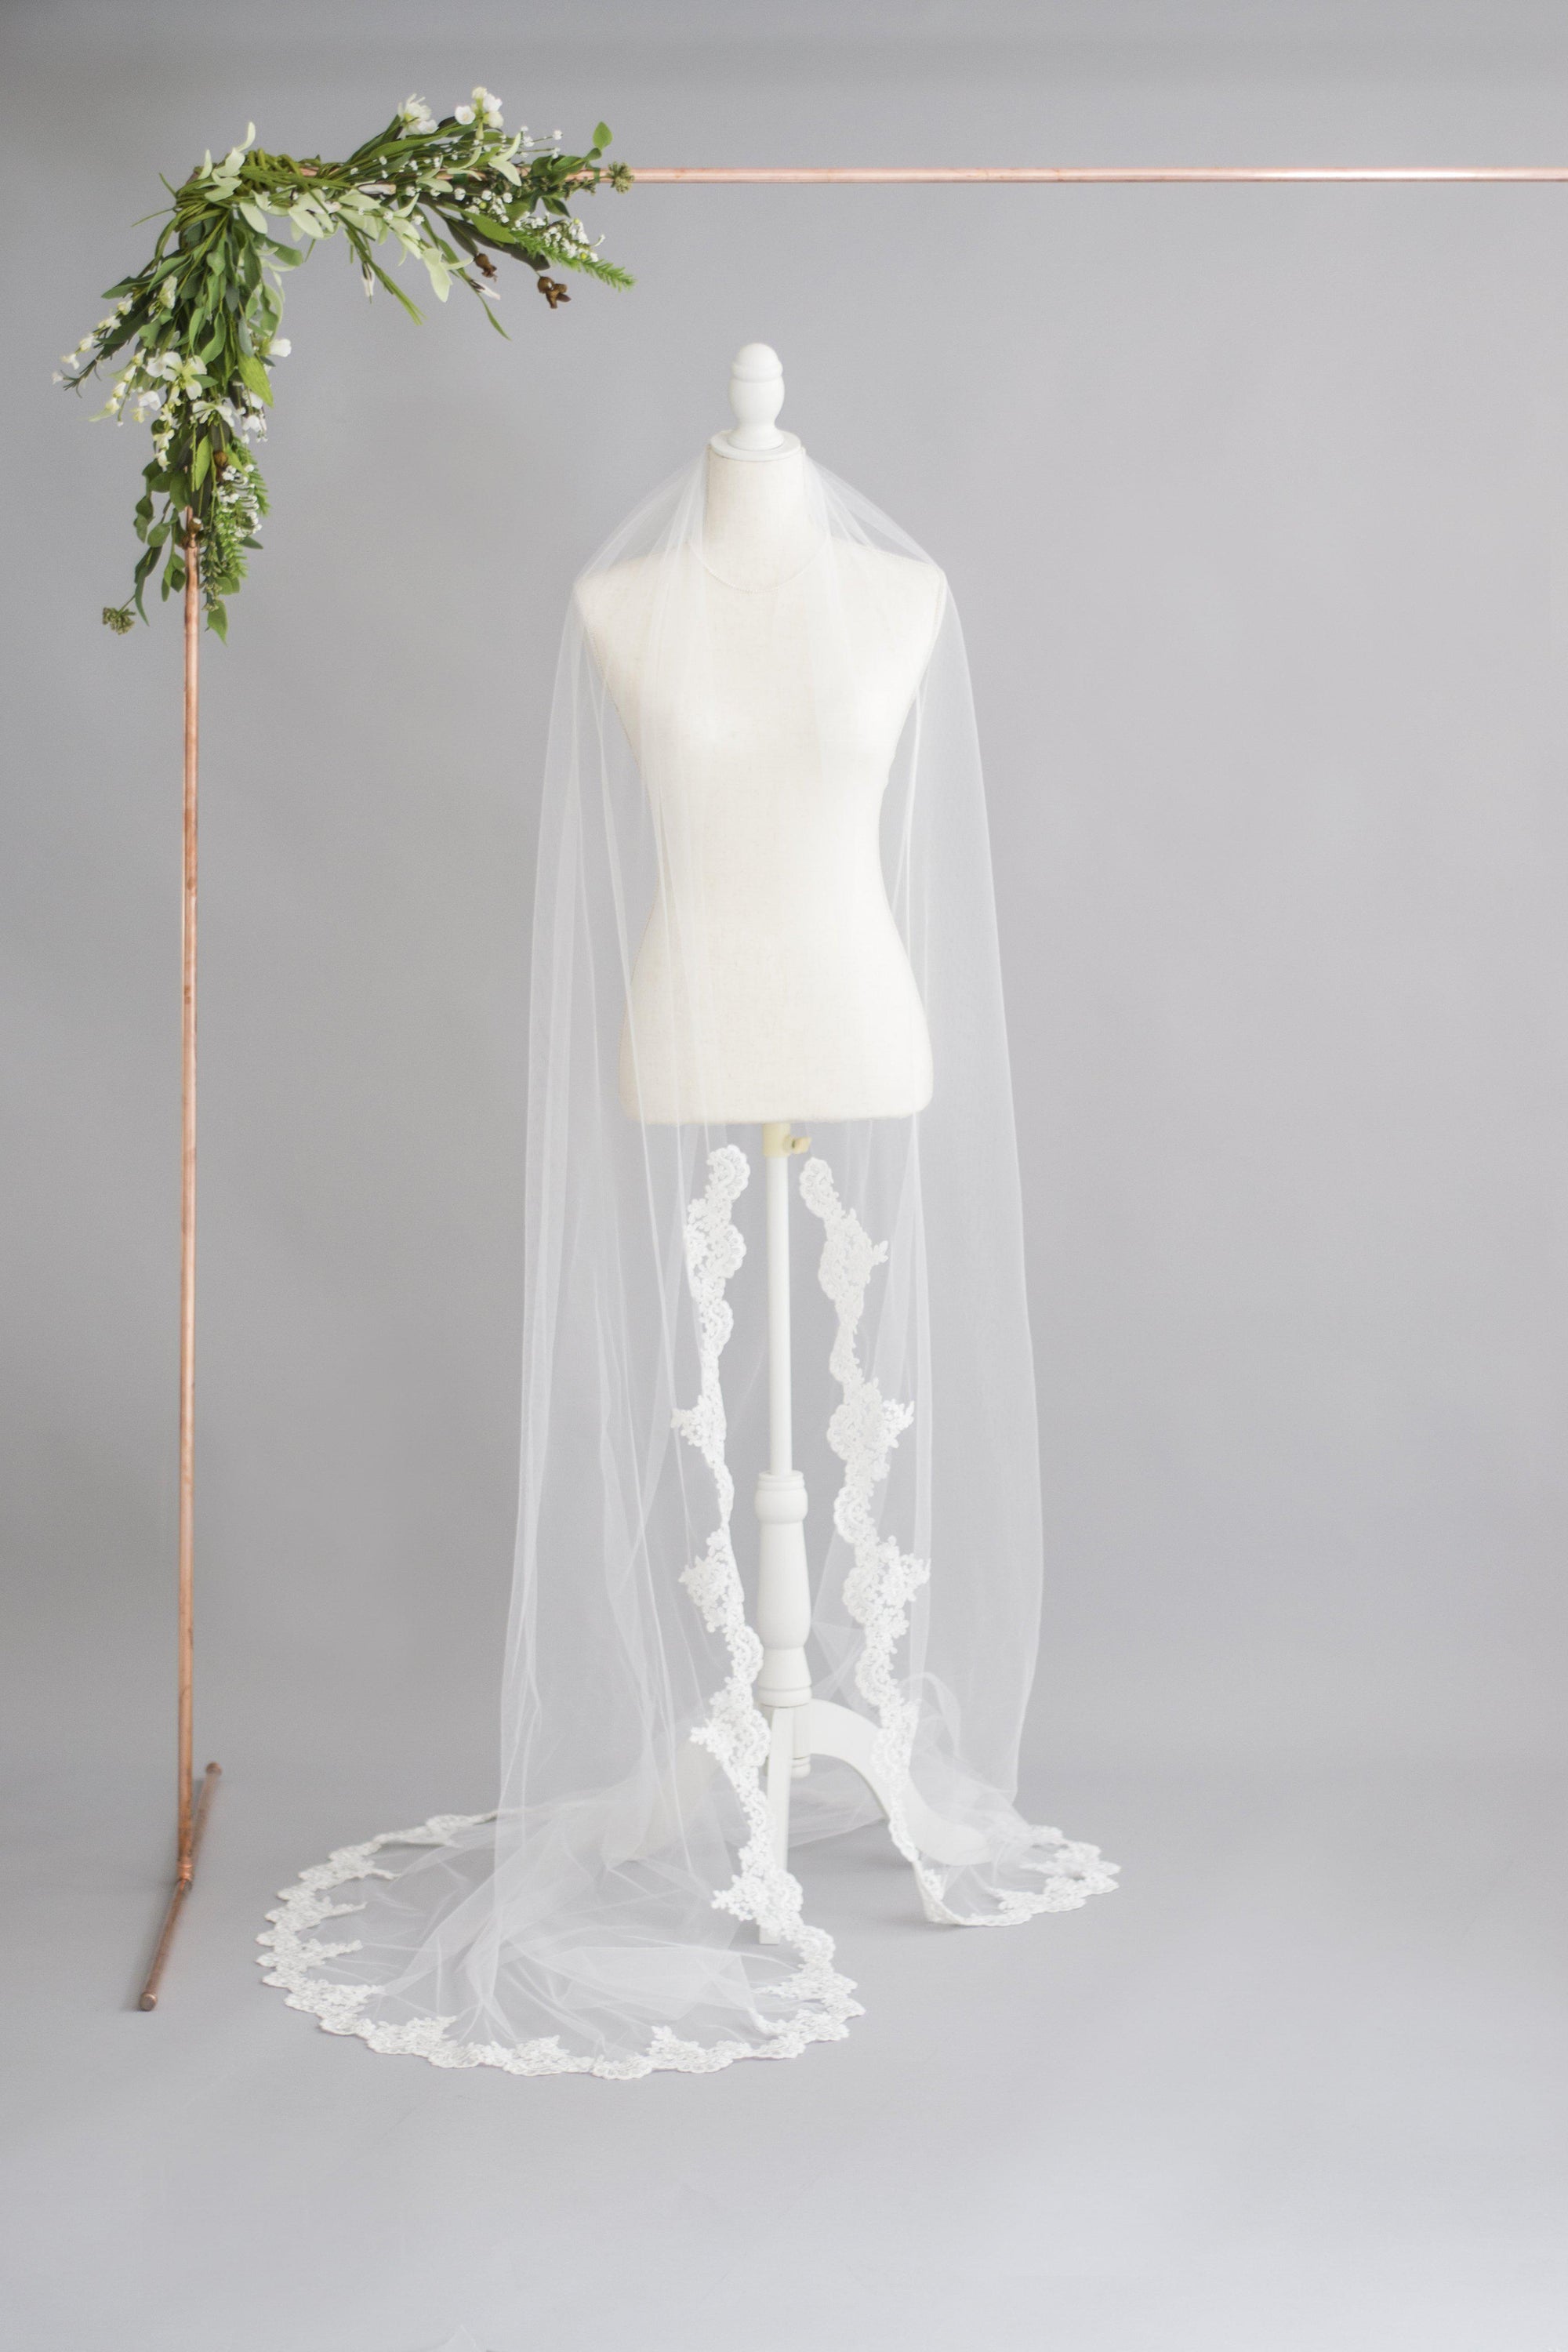 Our New Semi Edged Wedding Veil with Lace Starting Around Wrists - Emma